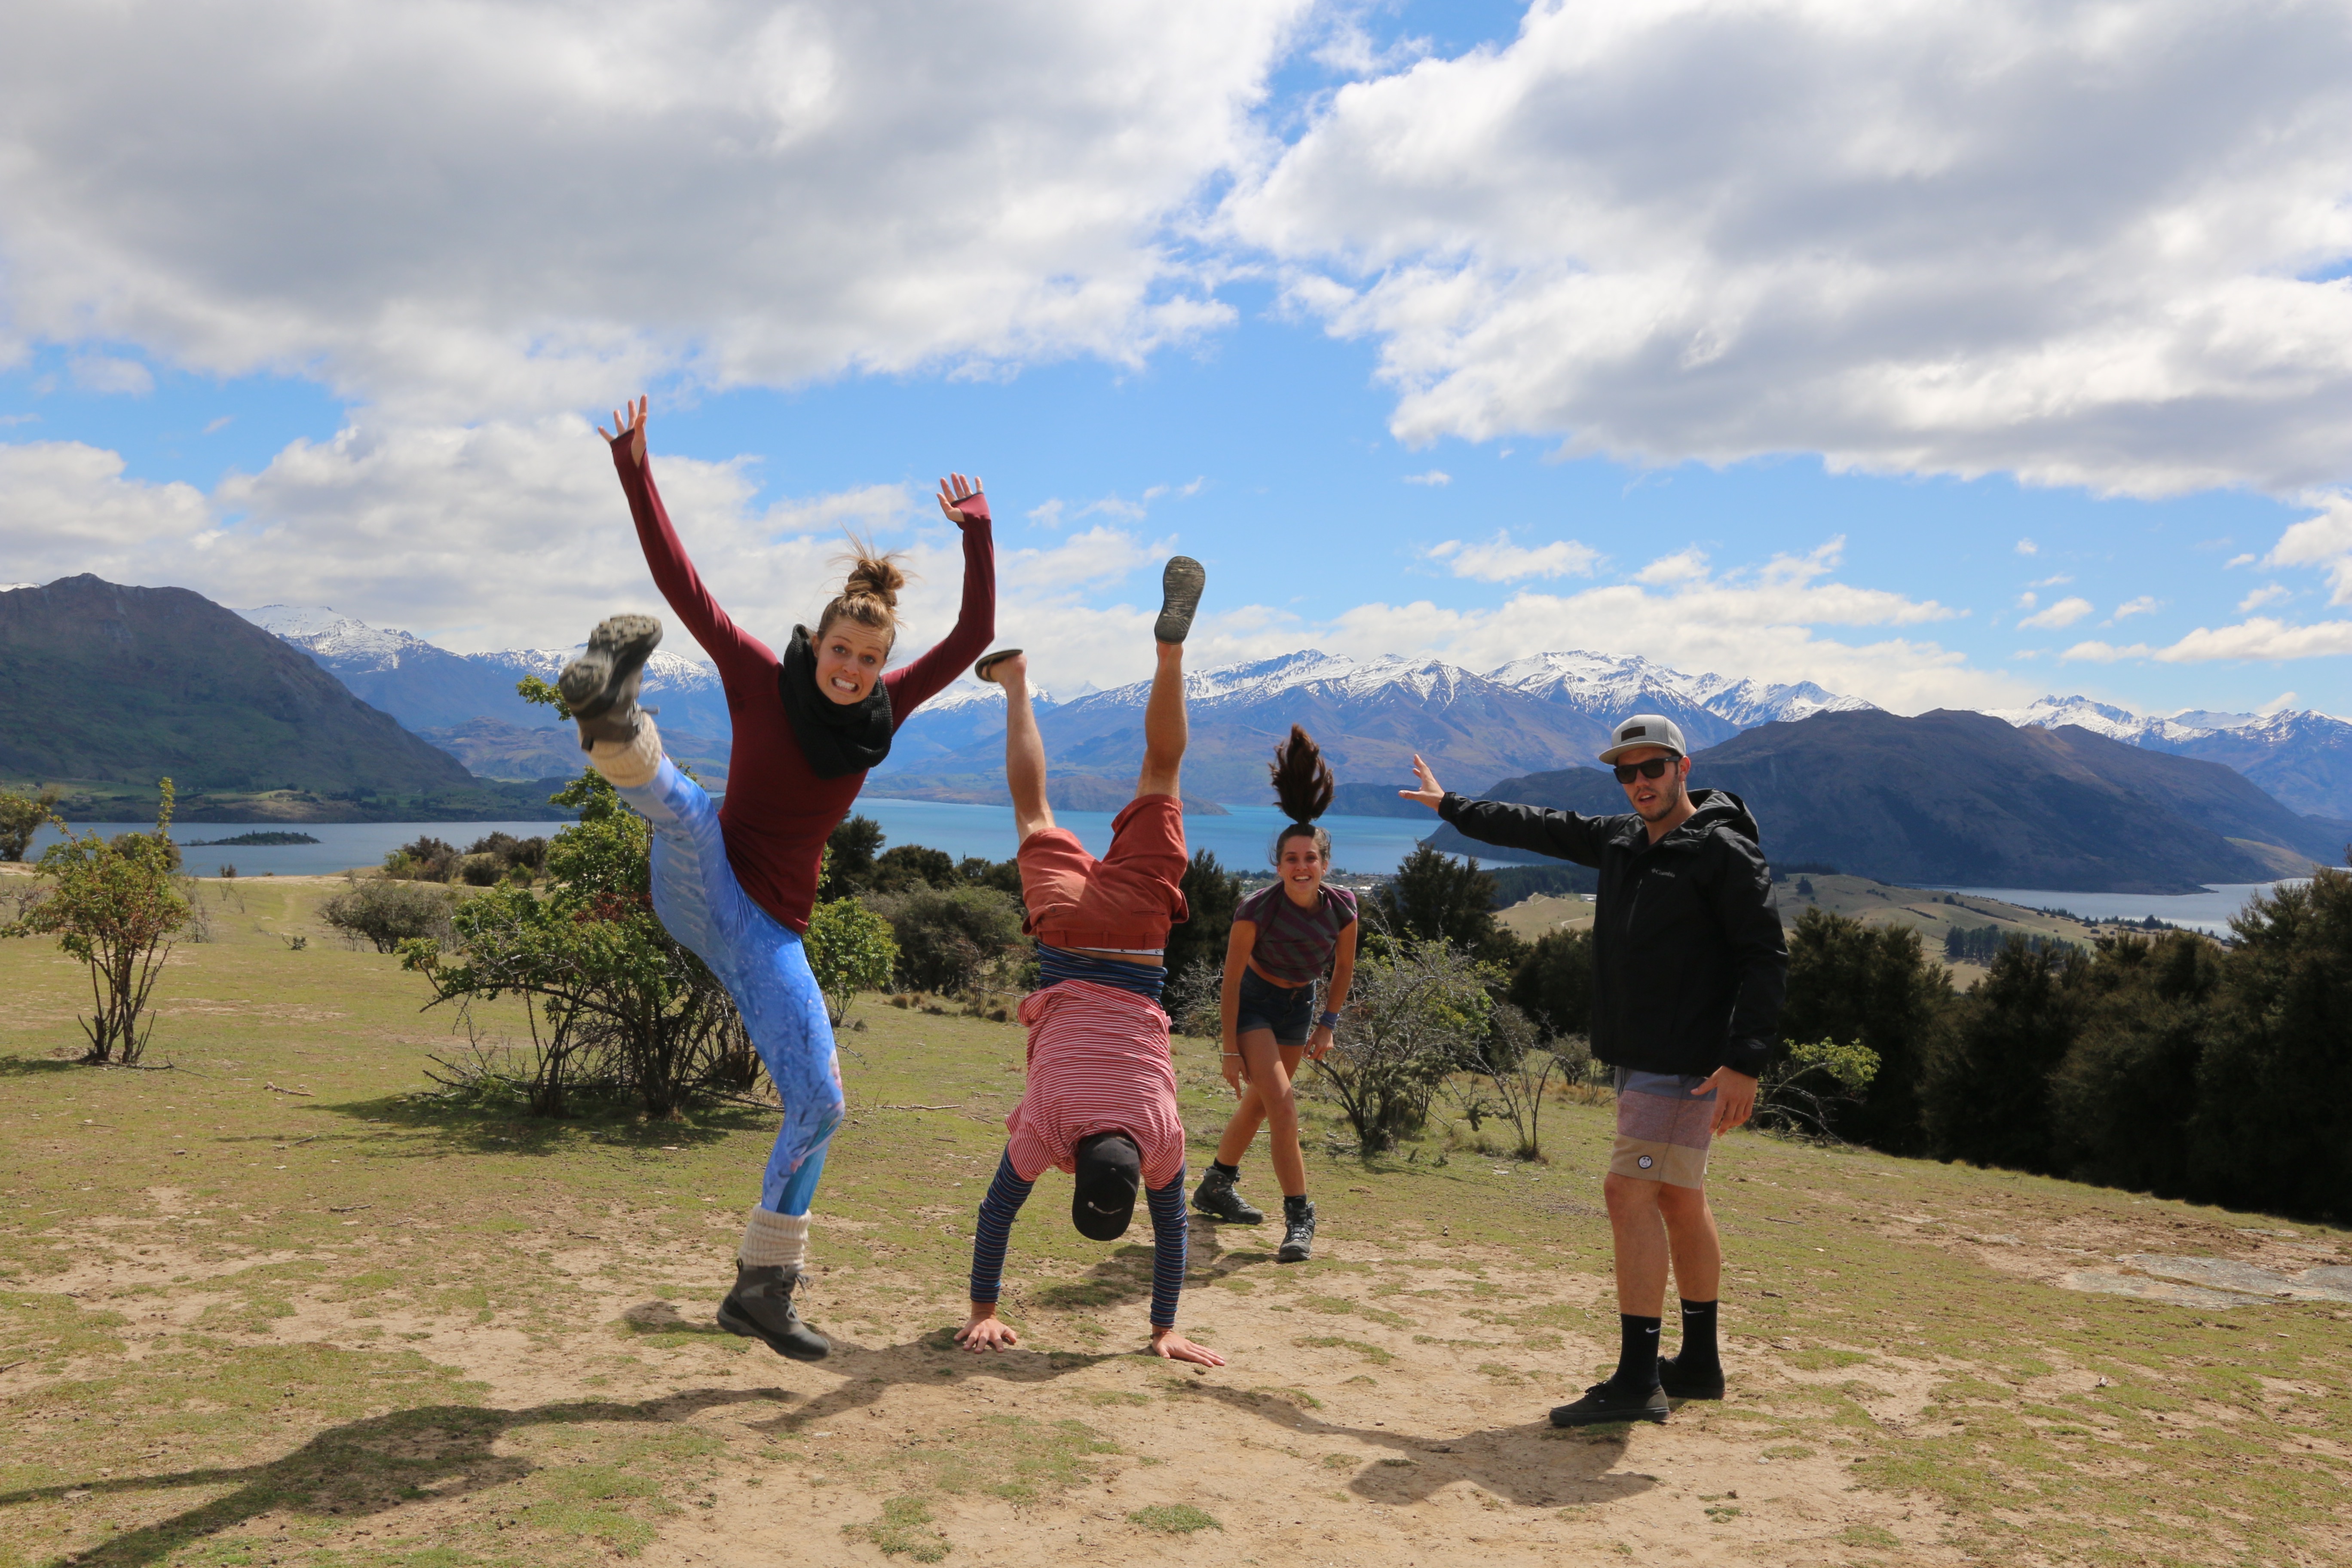 Traveling around the South Island of New Zealand with the backseat bandits